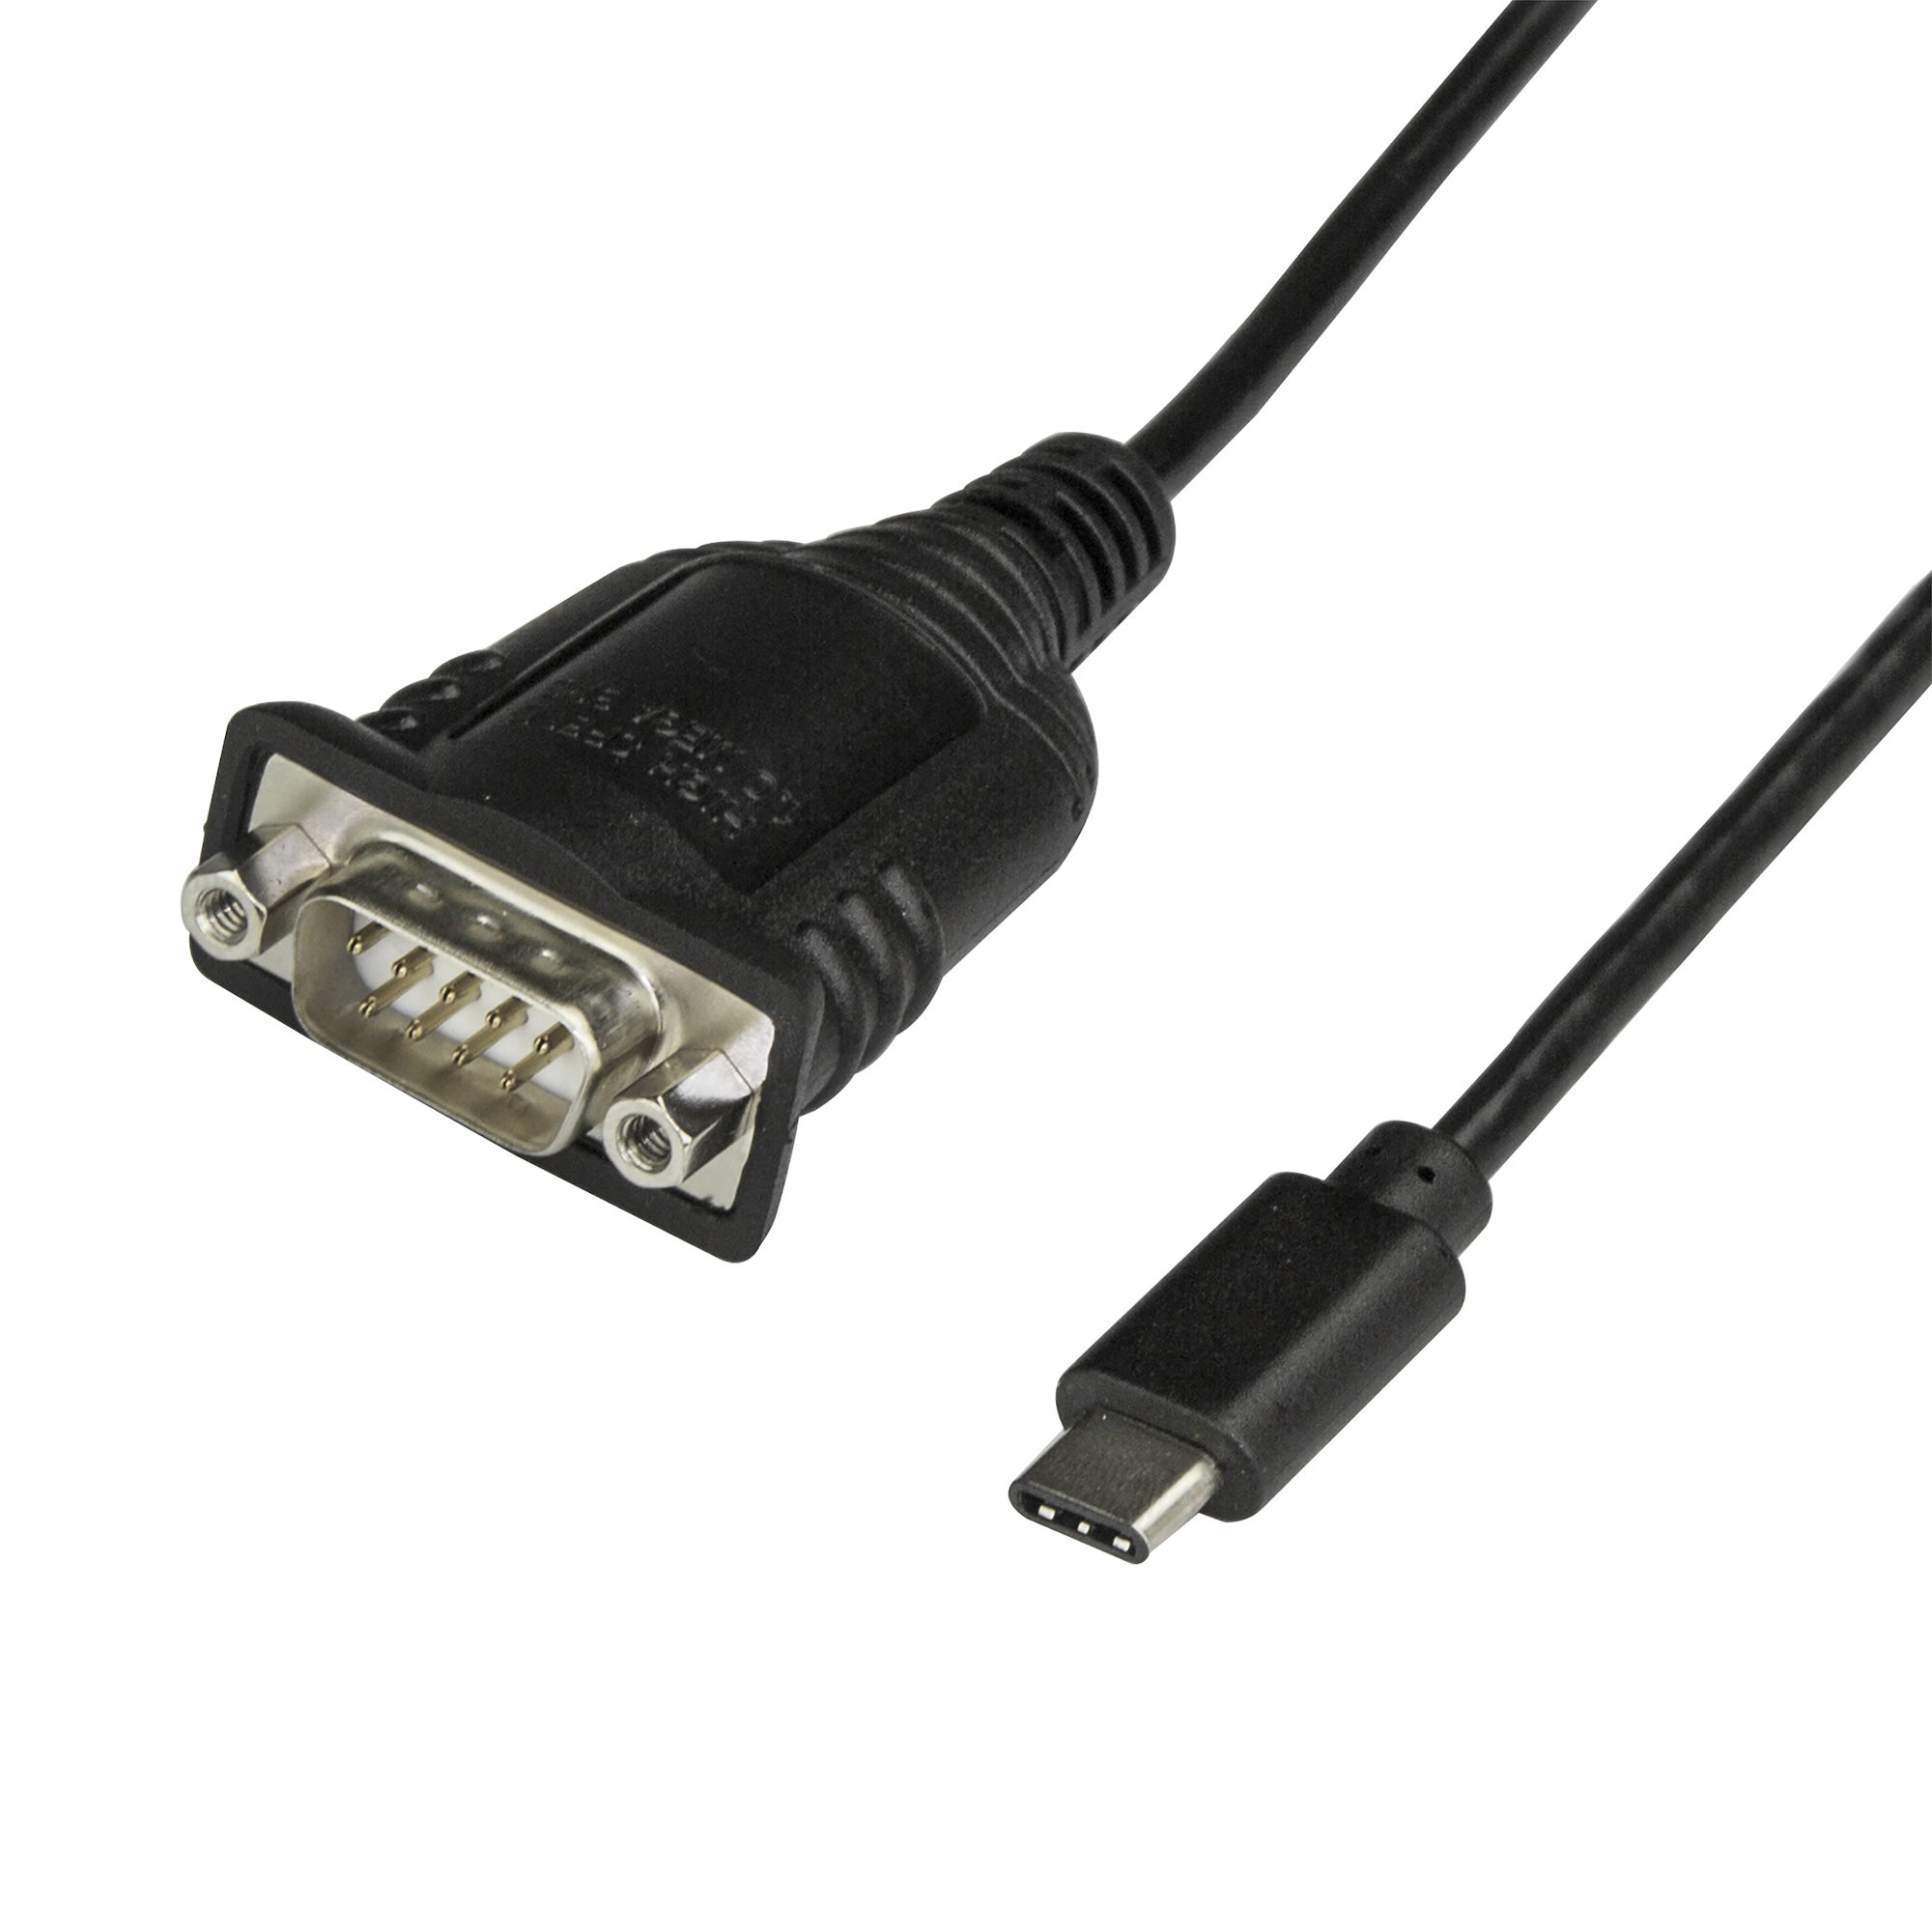  24-pin USB 2.0 Type-C Male to 9-pin DB-9 RS-232 Serial Male 40cm - Black  